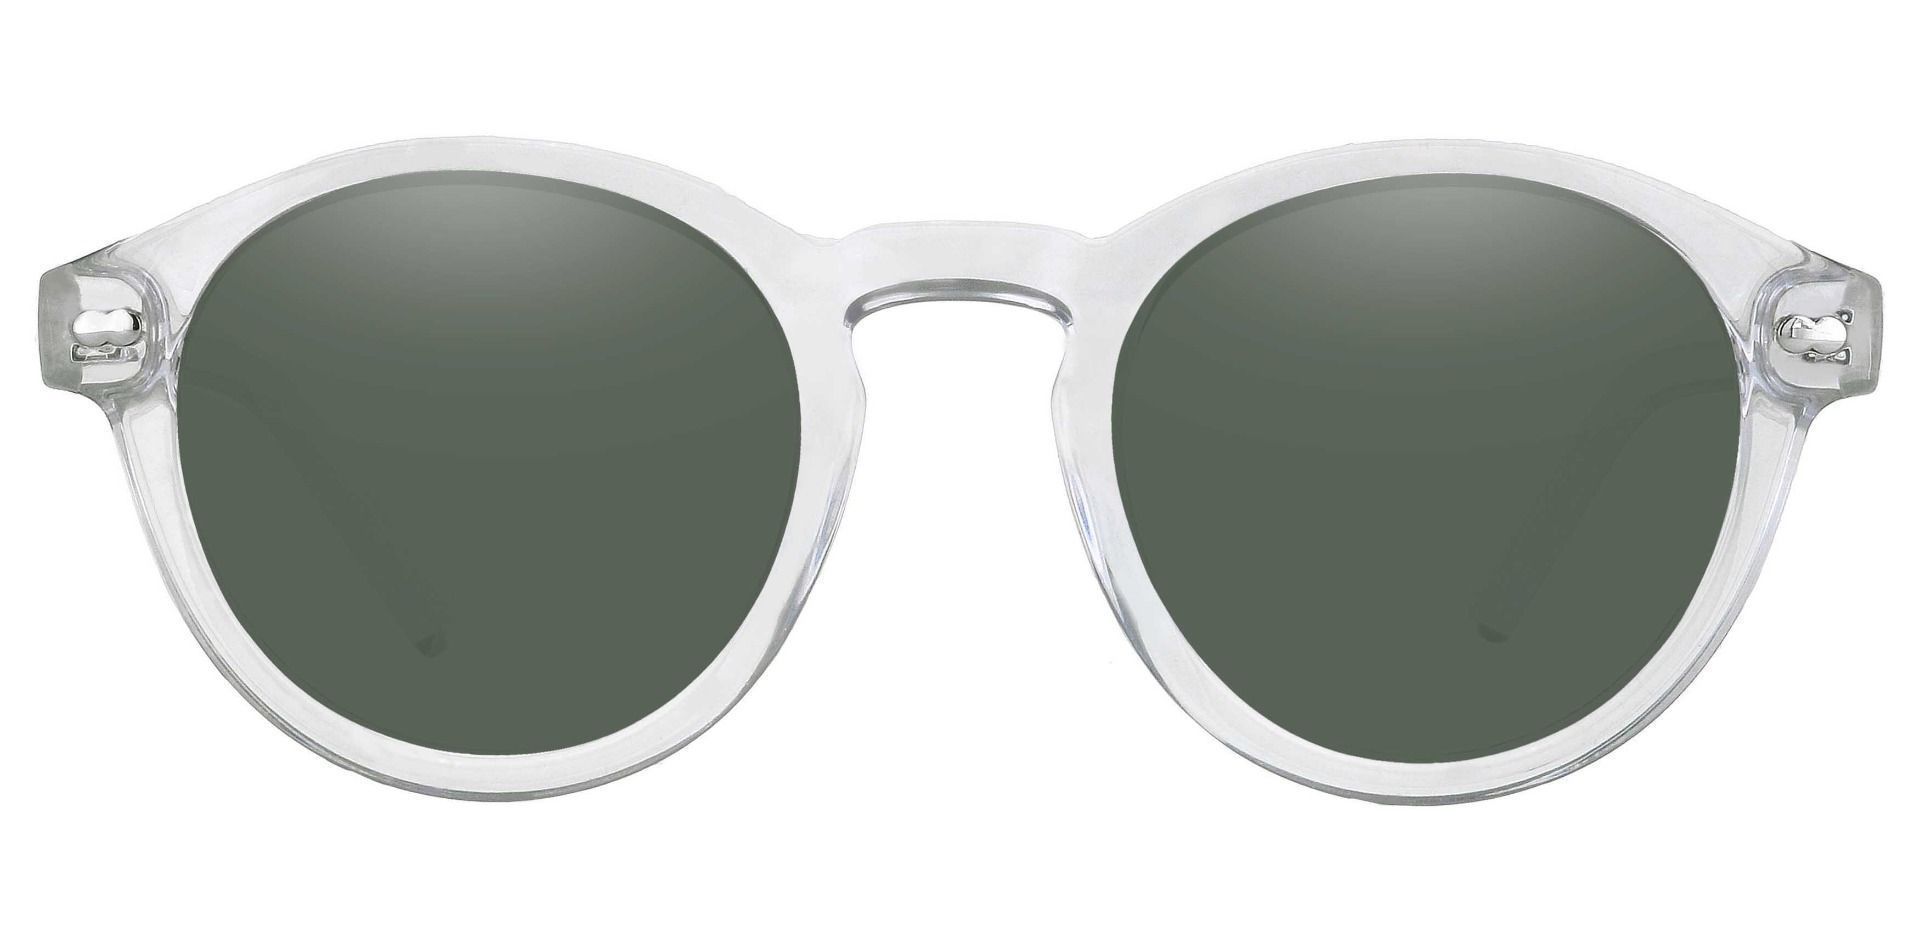 Vee Round Prescription Sunglasses Clear Frame With Gray Lenses 